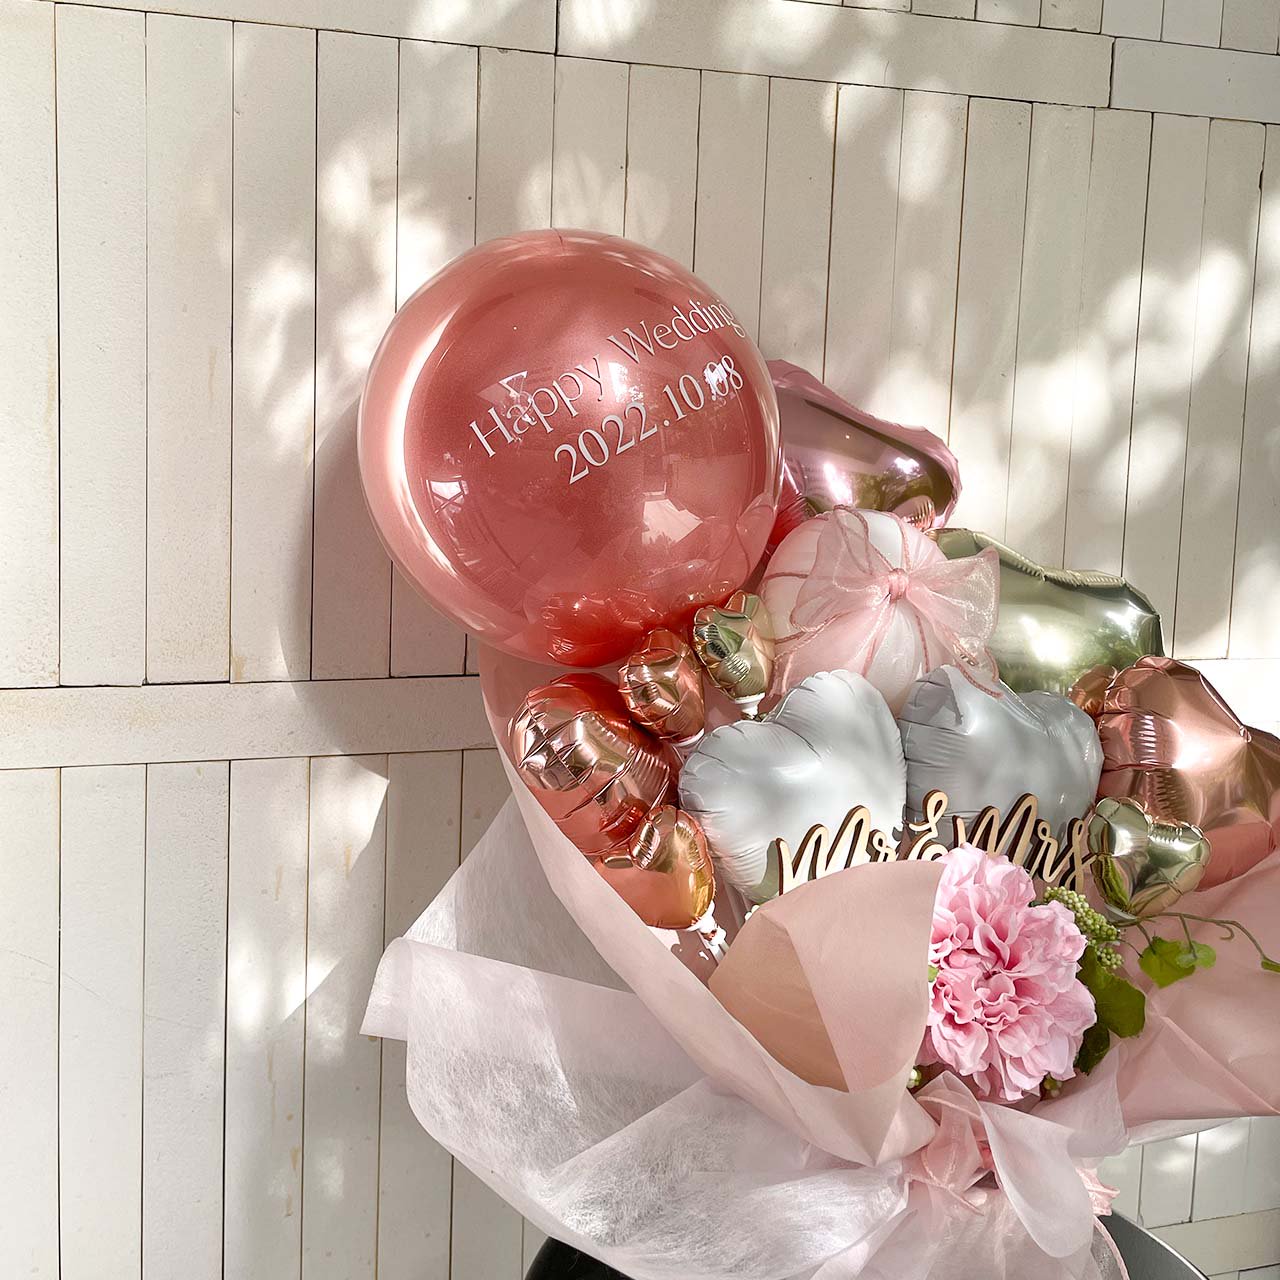 Angers Mr&Mrs Balloon Gift - Table top type - アンジェバルーン 